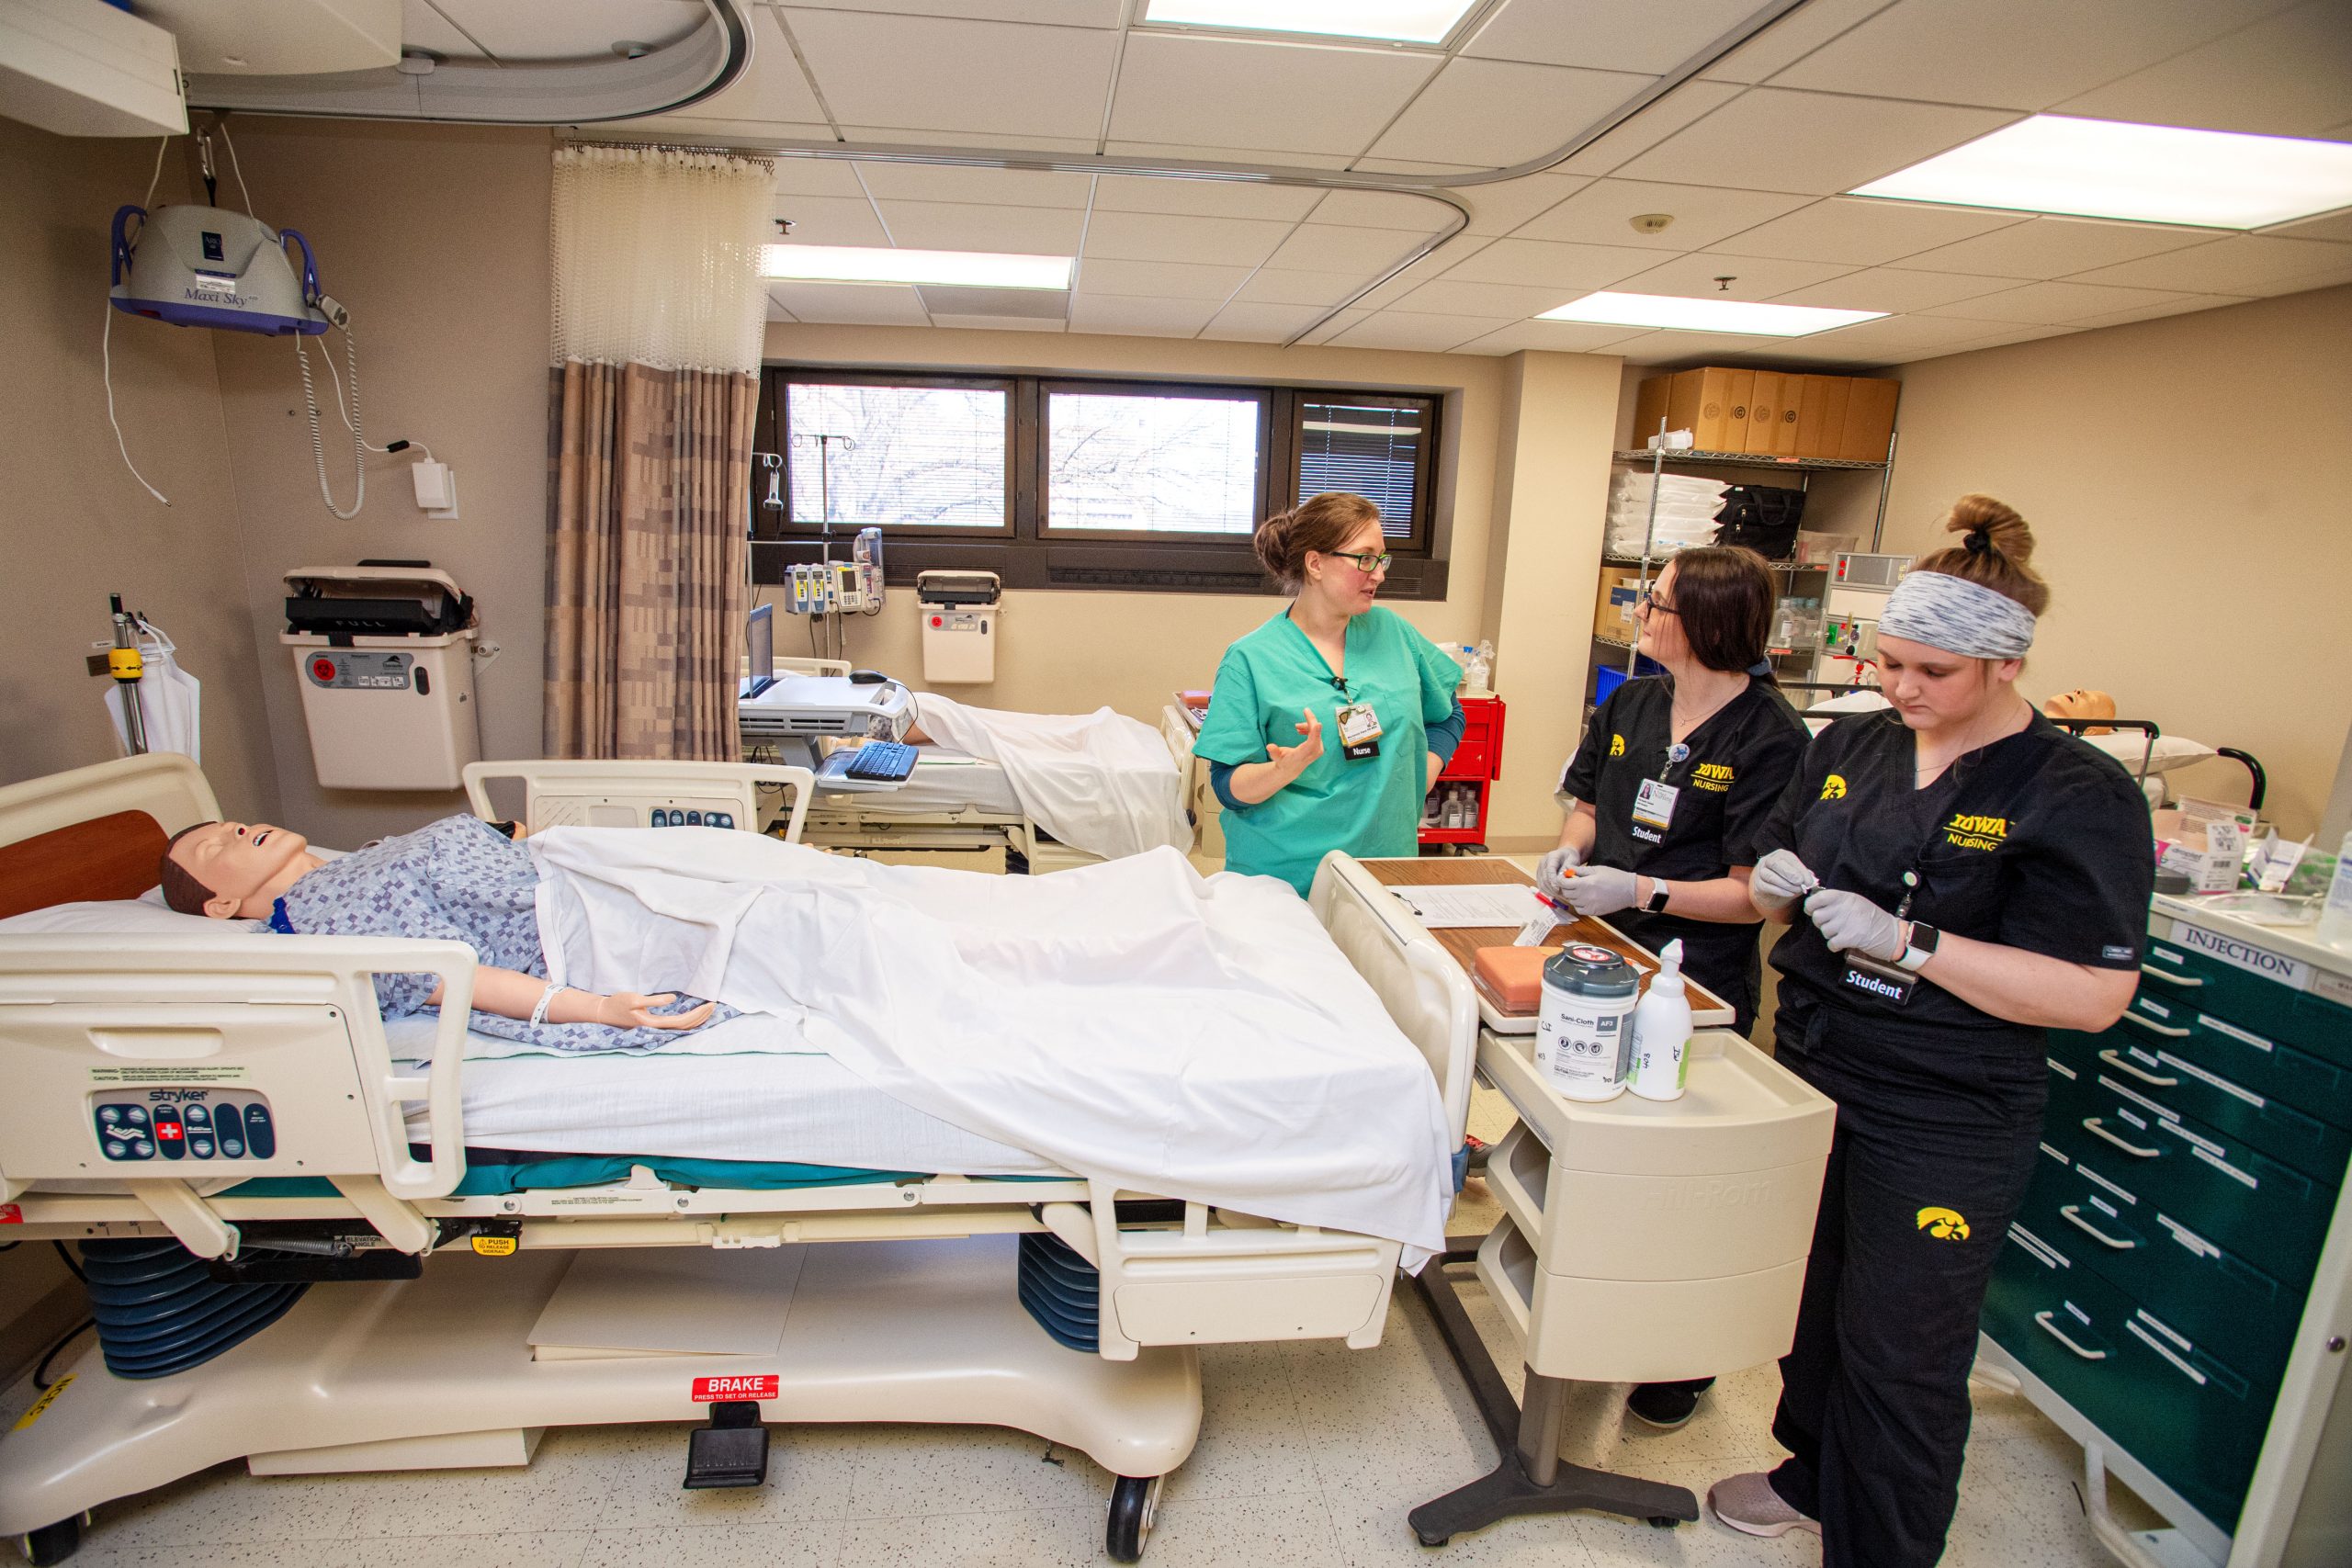 Nursing students Regan Hulsing and Michaela Inman in a simulated hospital room in the Clinical Education Center.